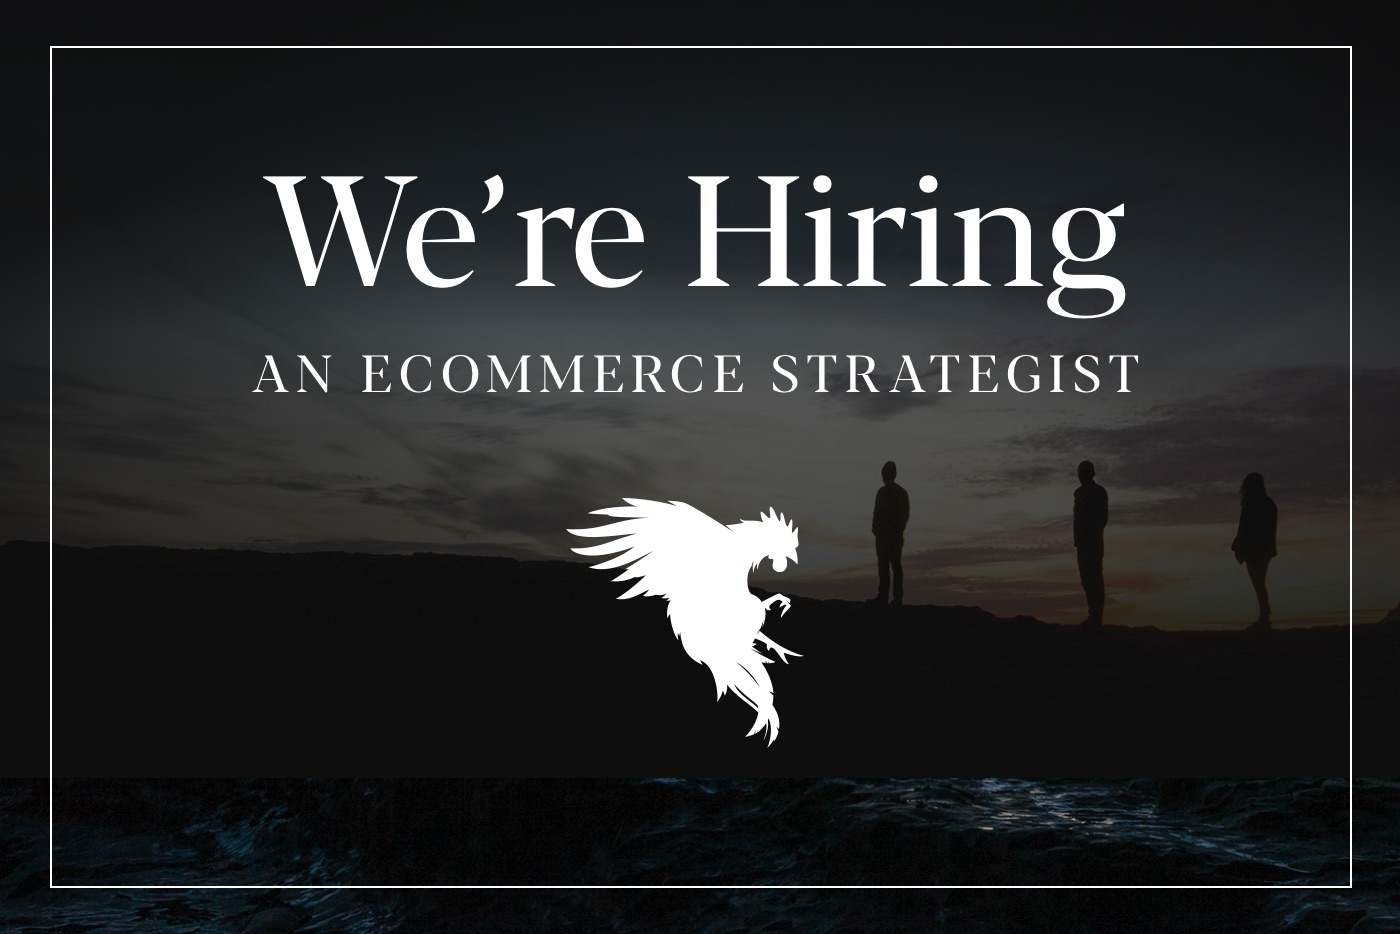 Hiring a Shopify Ecommerce Strategist for a web development agency.